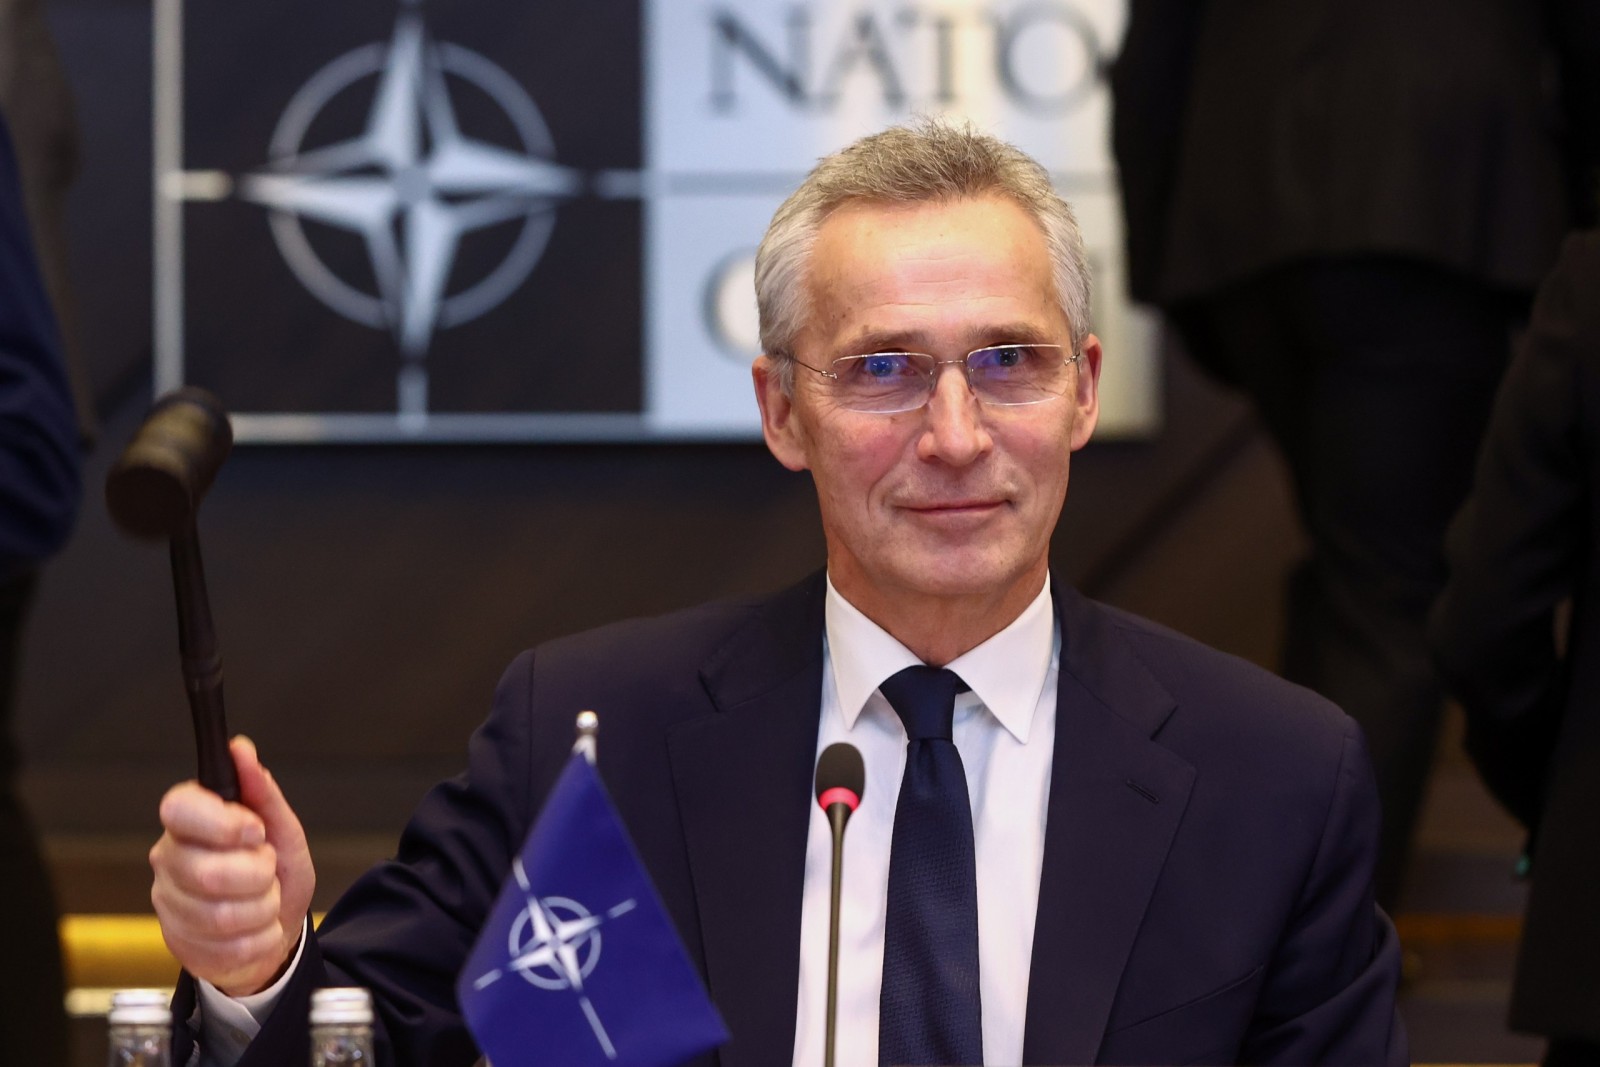 epa10466941 NATO Secretary General Jens Stoltenberg at the start of a NATO defense ministers meeting at the alliance's headquarters in Brussels, Belgium, 14 February 2023. Defense Ministers of the North Atlantic Treaty Organization (NATO) countries gather in Brussels from 14 to 15 February.  EPA/STEPHANIE LECOCQ